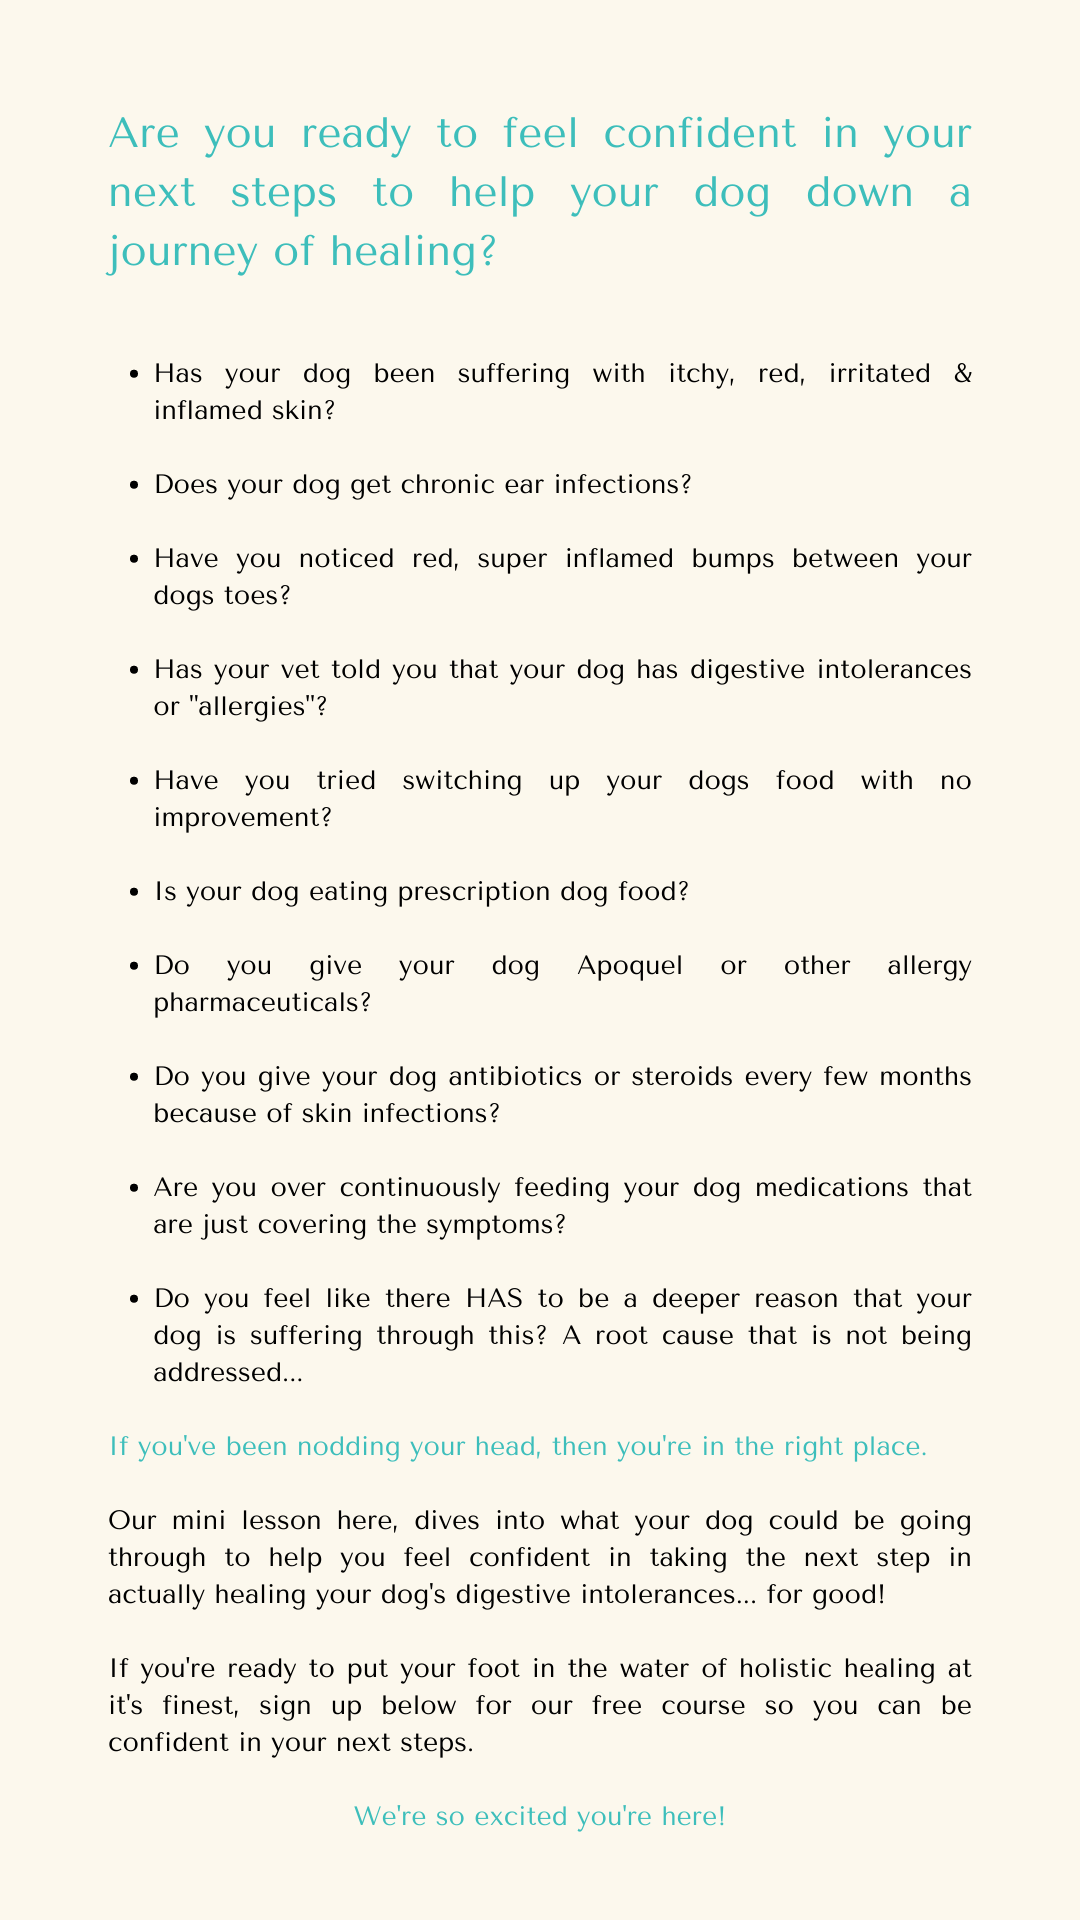 DOES YOUR DOG NEED LEAKY GUT RESET? HOW TO HEAL YOUR DOGS DIGESTIVE INTOLERANCES THROUGH LEAKY GUT RESET?